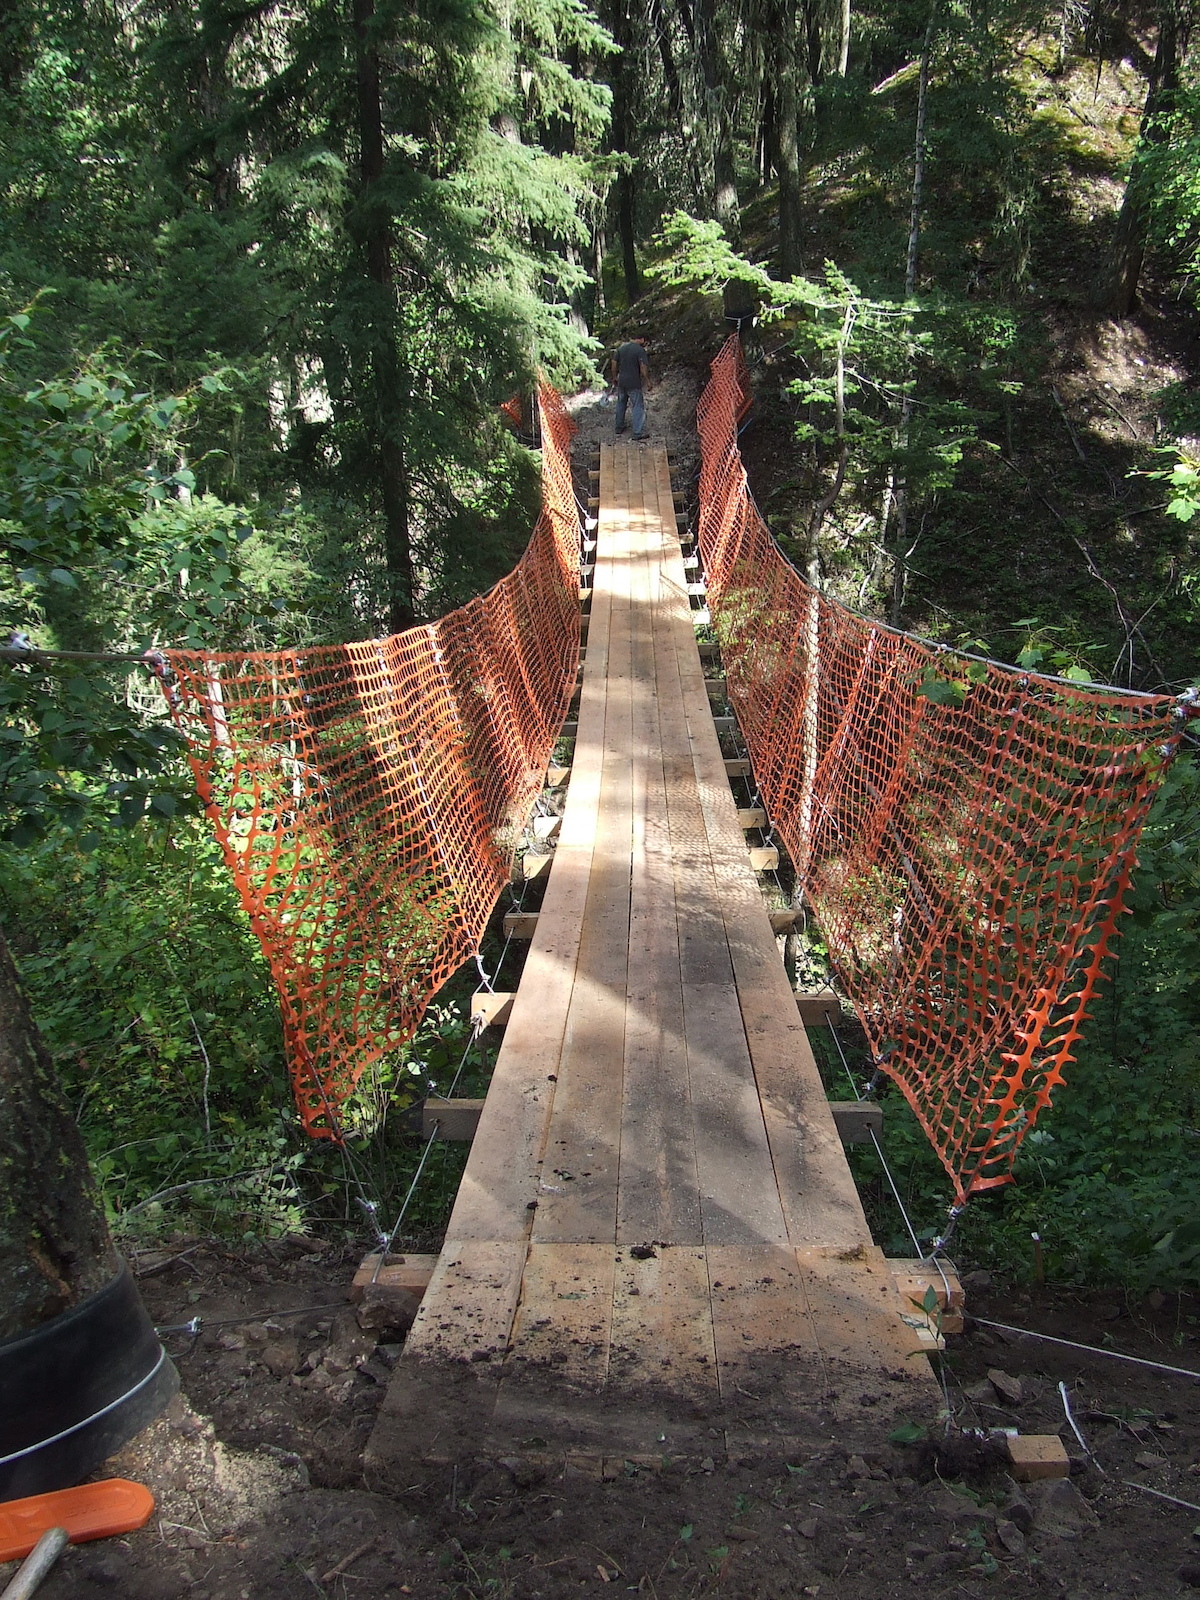 Suspension bridge. 4' wide and 100' long. We used 1/2" and 1/4" galvanized aircraft cable. 4" x4" stringers, spaced 5' apart with 8" x 2" x 20' fir decking.